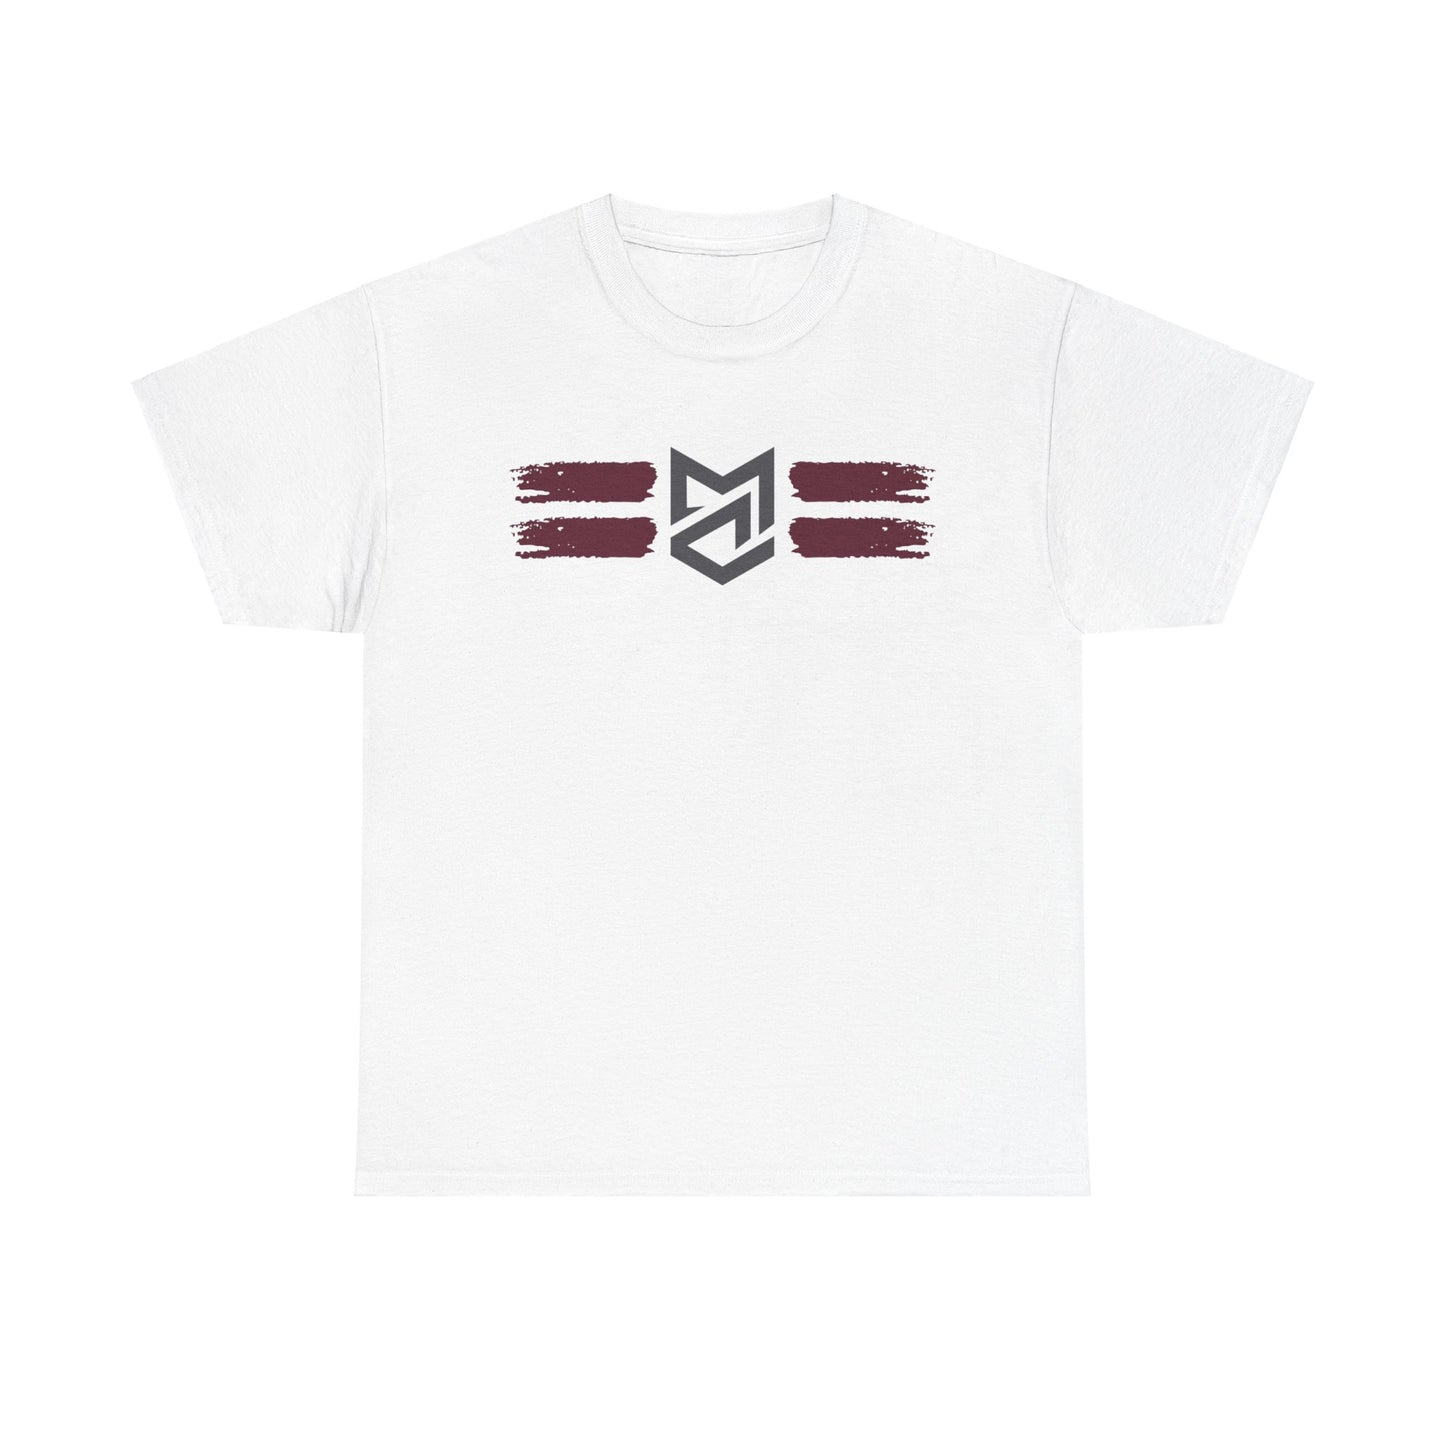 Cam Marks Team Colors Tee